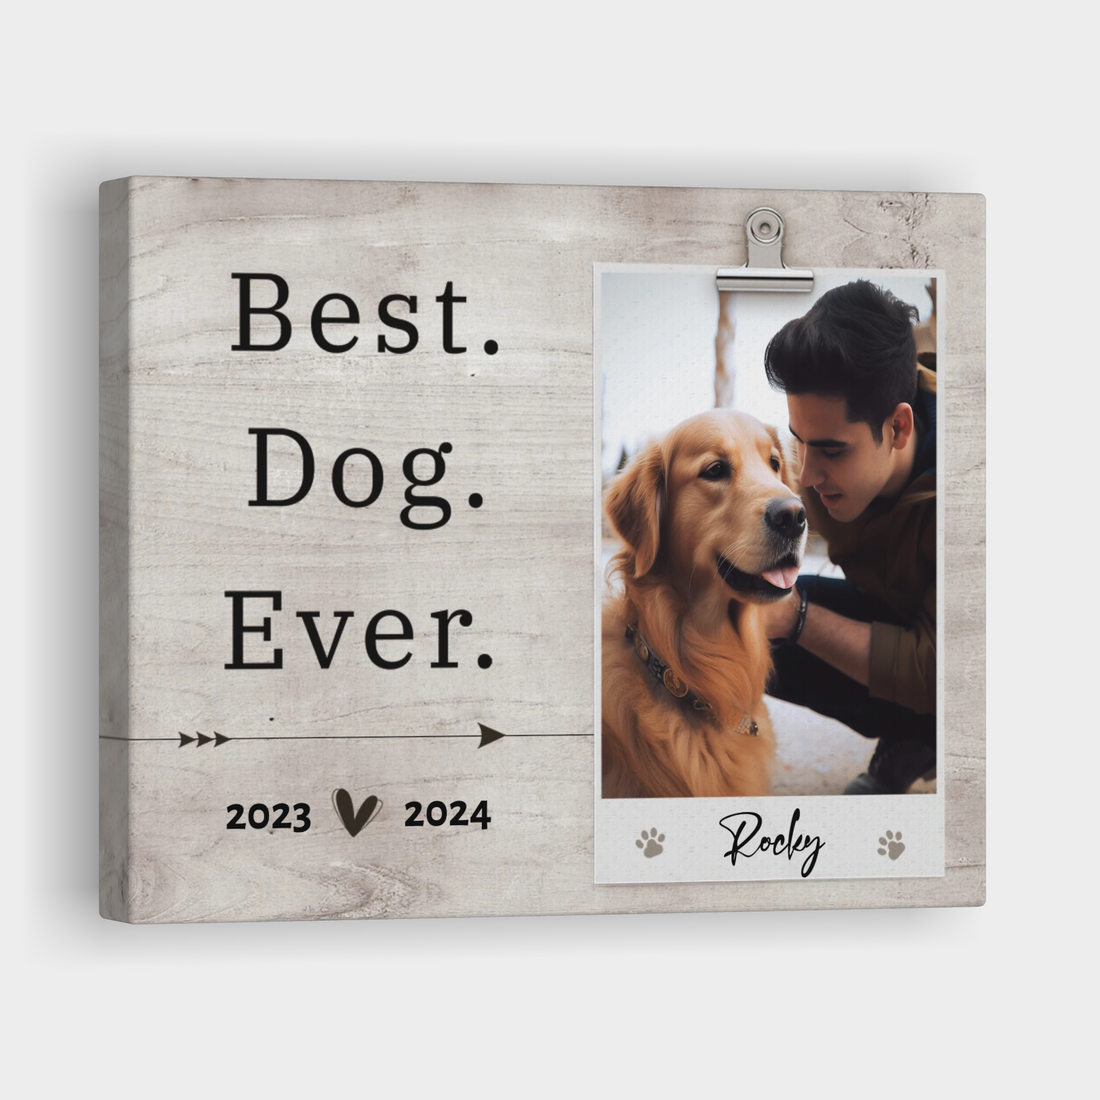 Best Dog Ever - Personalized Pet Memorial Print